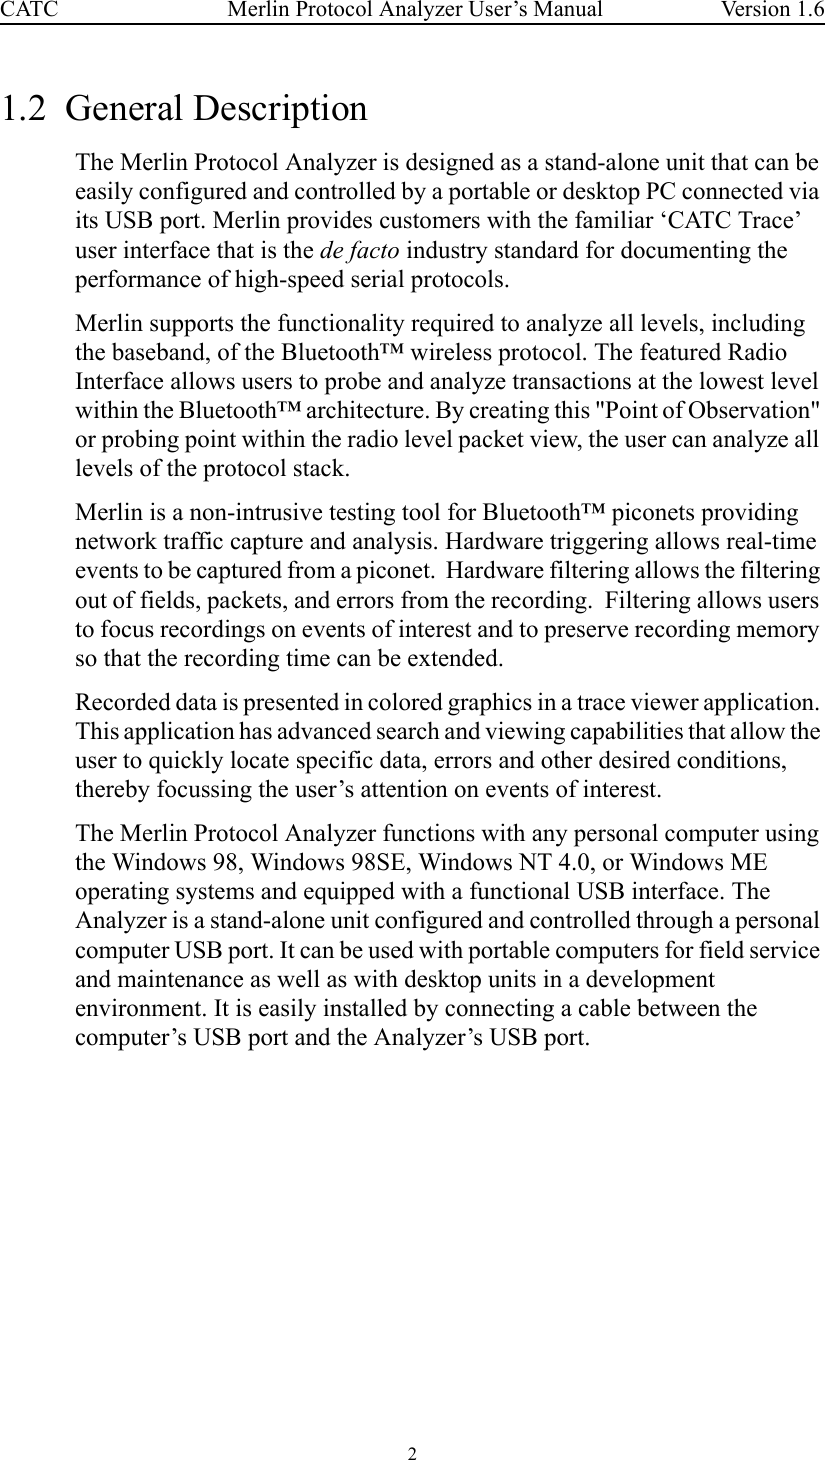 2 Merlin Protocol Analyzer User’s ManualCATC Version 1.61.2  General Description The Merlin Protocol Analyzer is designed as a stand-alone unit that can be easily configured and controlled by a portable or desktop PC connected via its USB port. Merlin provides customers with the familiar ‘CATC Trace’ user interface that is the de facto industry standard for documenting the performance of high-speed serial protocols. Merlin supports the functionality required to analyze all levels, including the baseband, of the Bluetooth™ wireless protocol. The featured Radio Interface allows users to probe and analyze transactions at the lowest level within the Bluetooth™ architecture. By creating this &quot;Point of Observation&quot; or probing point within the radio level packet view, the user can analyze all levels of the protocol stack.Merlin is a non-intrusive testing tool for Bluetooth™ piconets providing network traffic capture and analysis. Hardware triggering allows real-time events to be captured from a piconet.  Hardware filtering allows the filtering out of fields, packets, and errors from the recording.  Filtering allows users to focus recordings on events of interest and to preserve recording memory so that the recording time can be extended.   Recorded data is presented in colored graphics in a trace viewer application. This application has advanced search and viewing capabilities that allow the user to quickly locate specific data, errors and other desired conditions, thereby focussing the user’s attention on events of interest. The Merlin Protocol Analyzer functions with any personal computer using the Windows 98, Windows 98SE, Windows NT 4.0, or Windows ME operating systems and equipped with a functional USB interface. The Analyzer is a stand-alone unit configured and controlled through a personal computer USB port. It can be used with portable computers for field service and maintenance as well as with desktop units in a development environment. It is easily installed by connecting a cable between the computer’s USB port and the Analyzer’s USB port.  